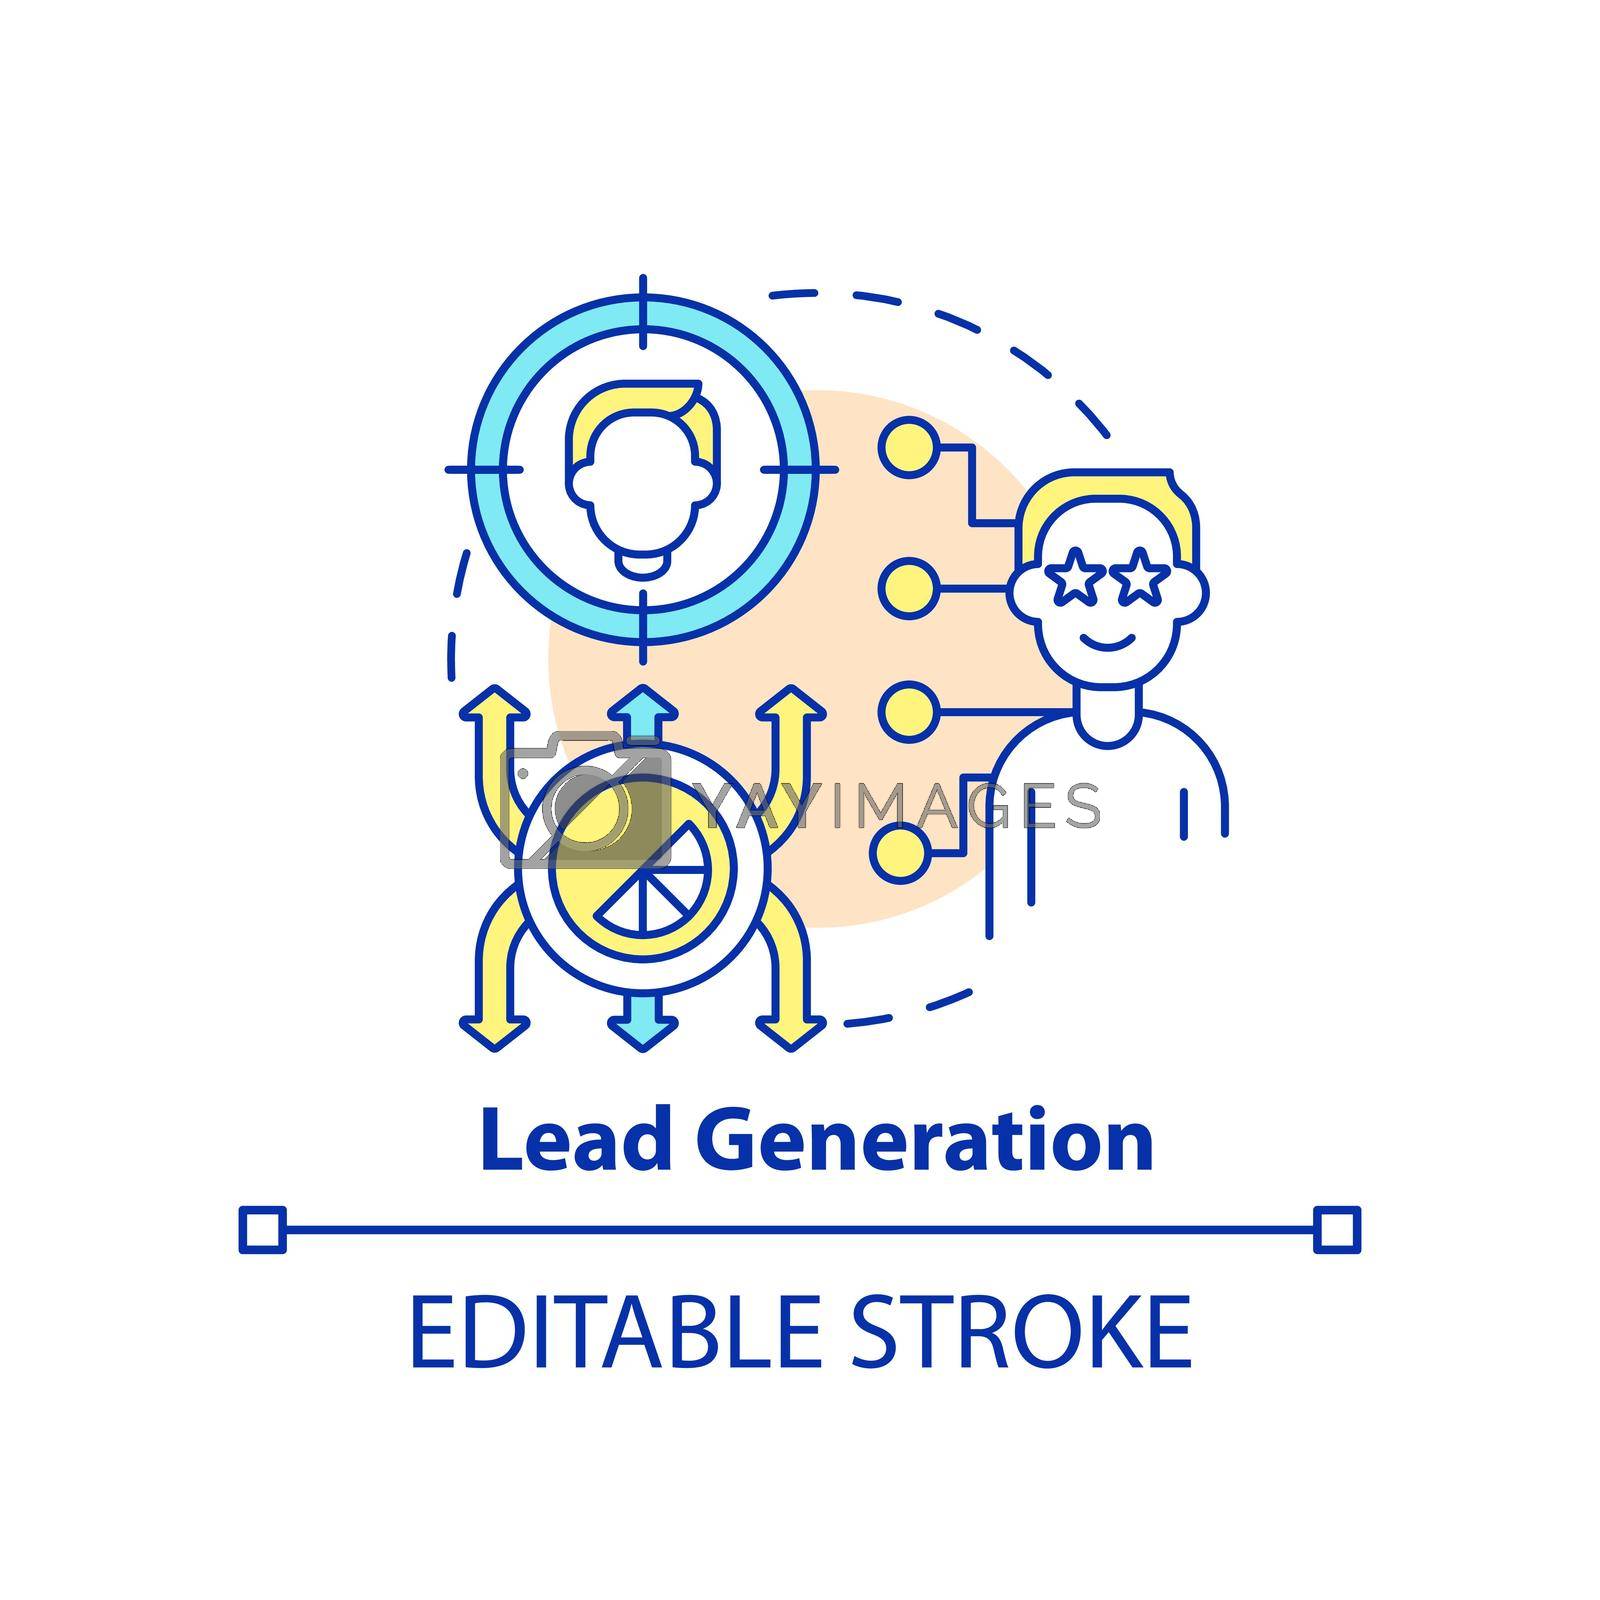 Royalty free image of Lead generation concept icon by bsd